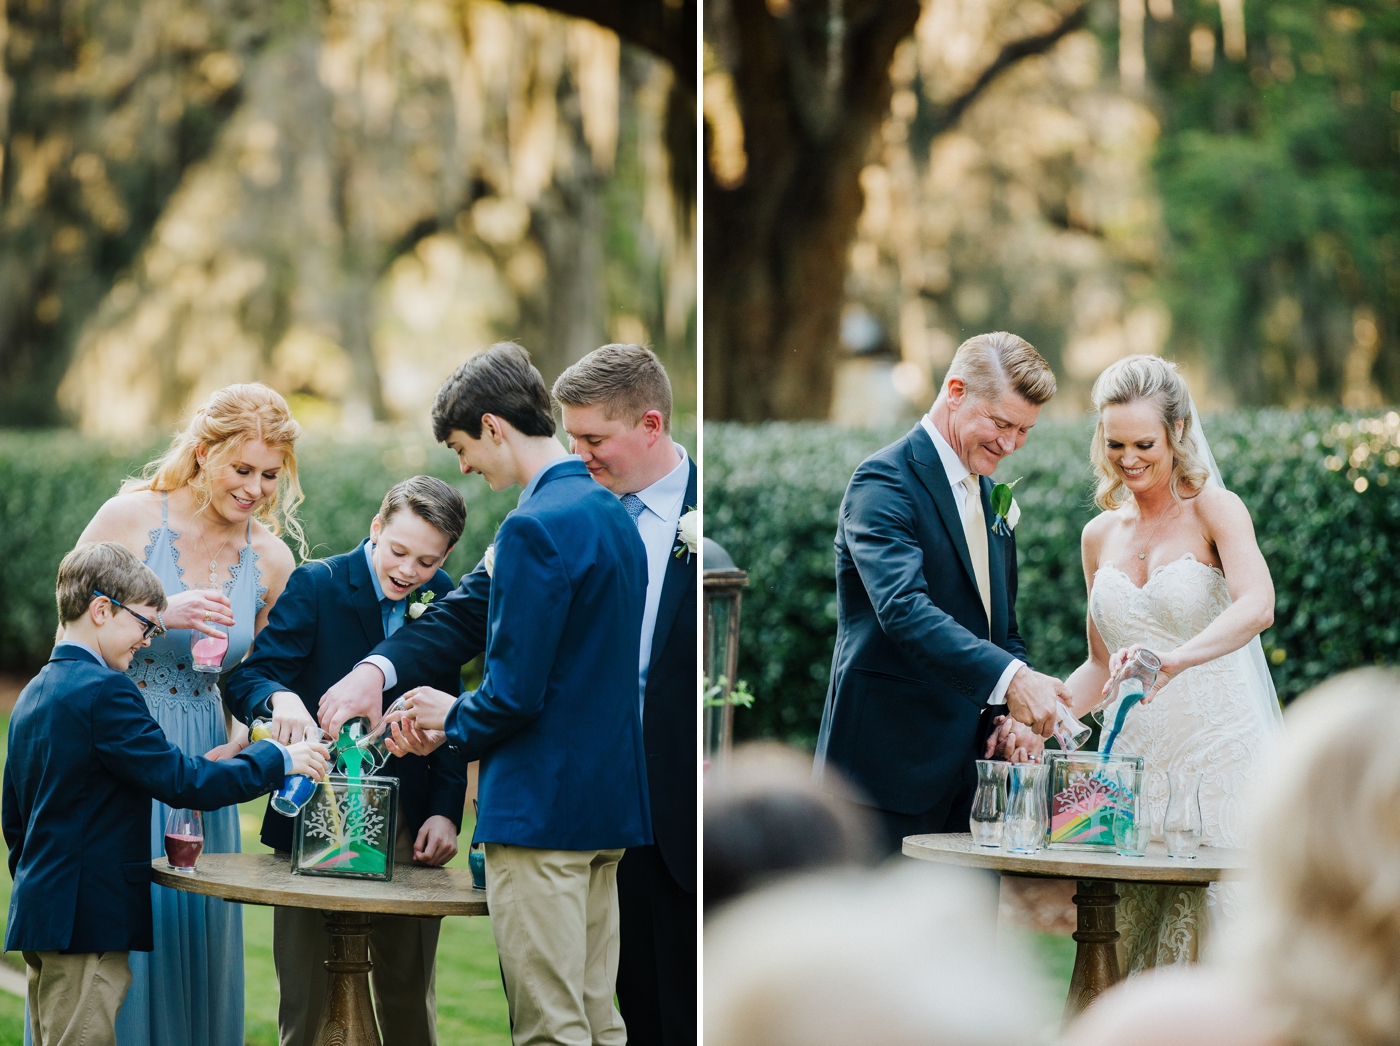 Sand Ceremony at an outdoor wedding ceremony